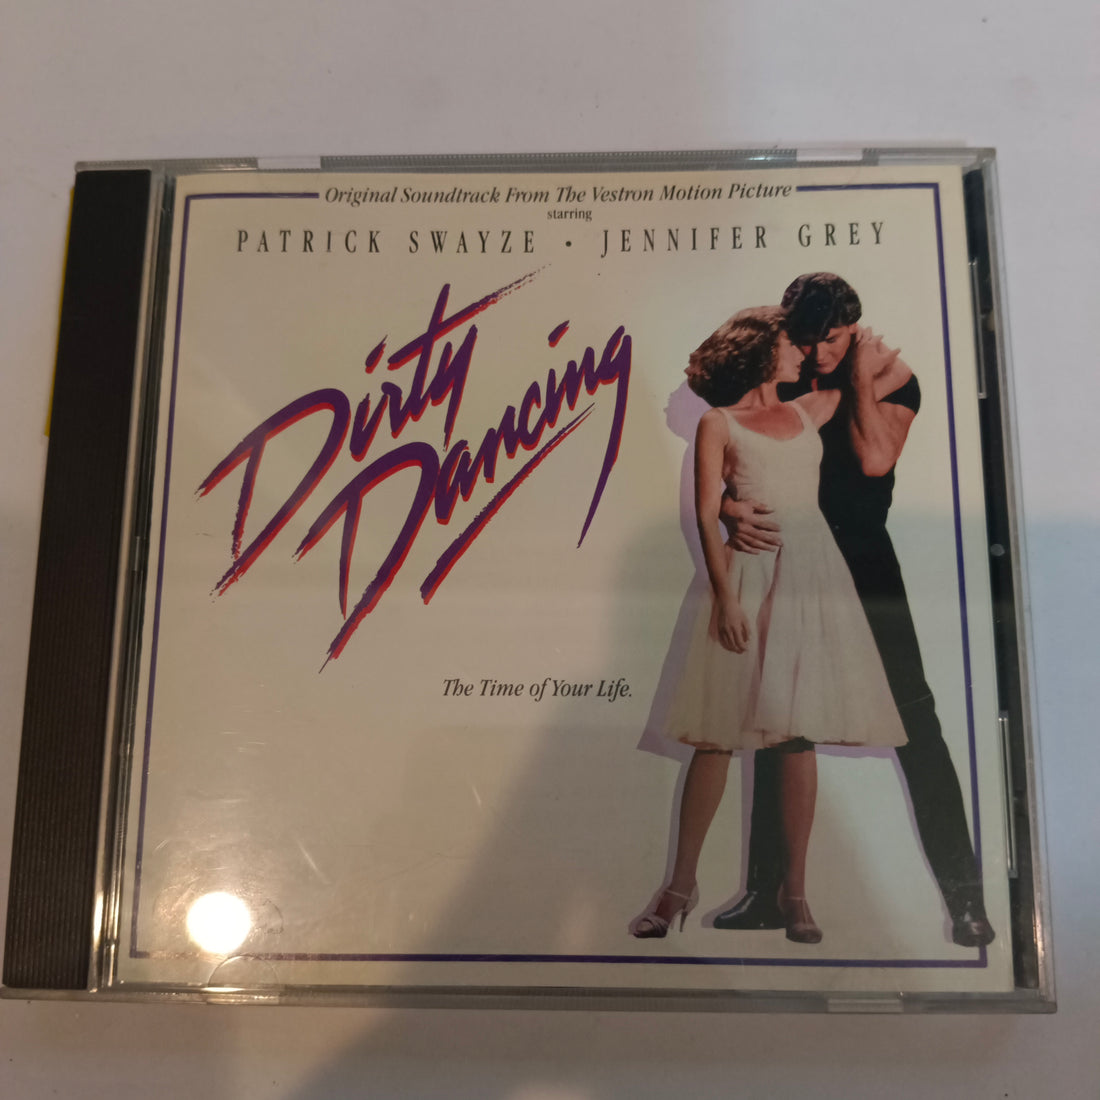 Dirty Dancing: Original Soundtrack From The Vestron Motion Picture